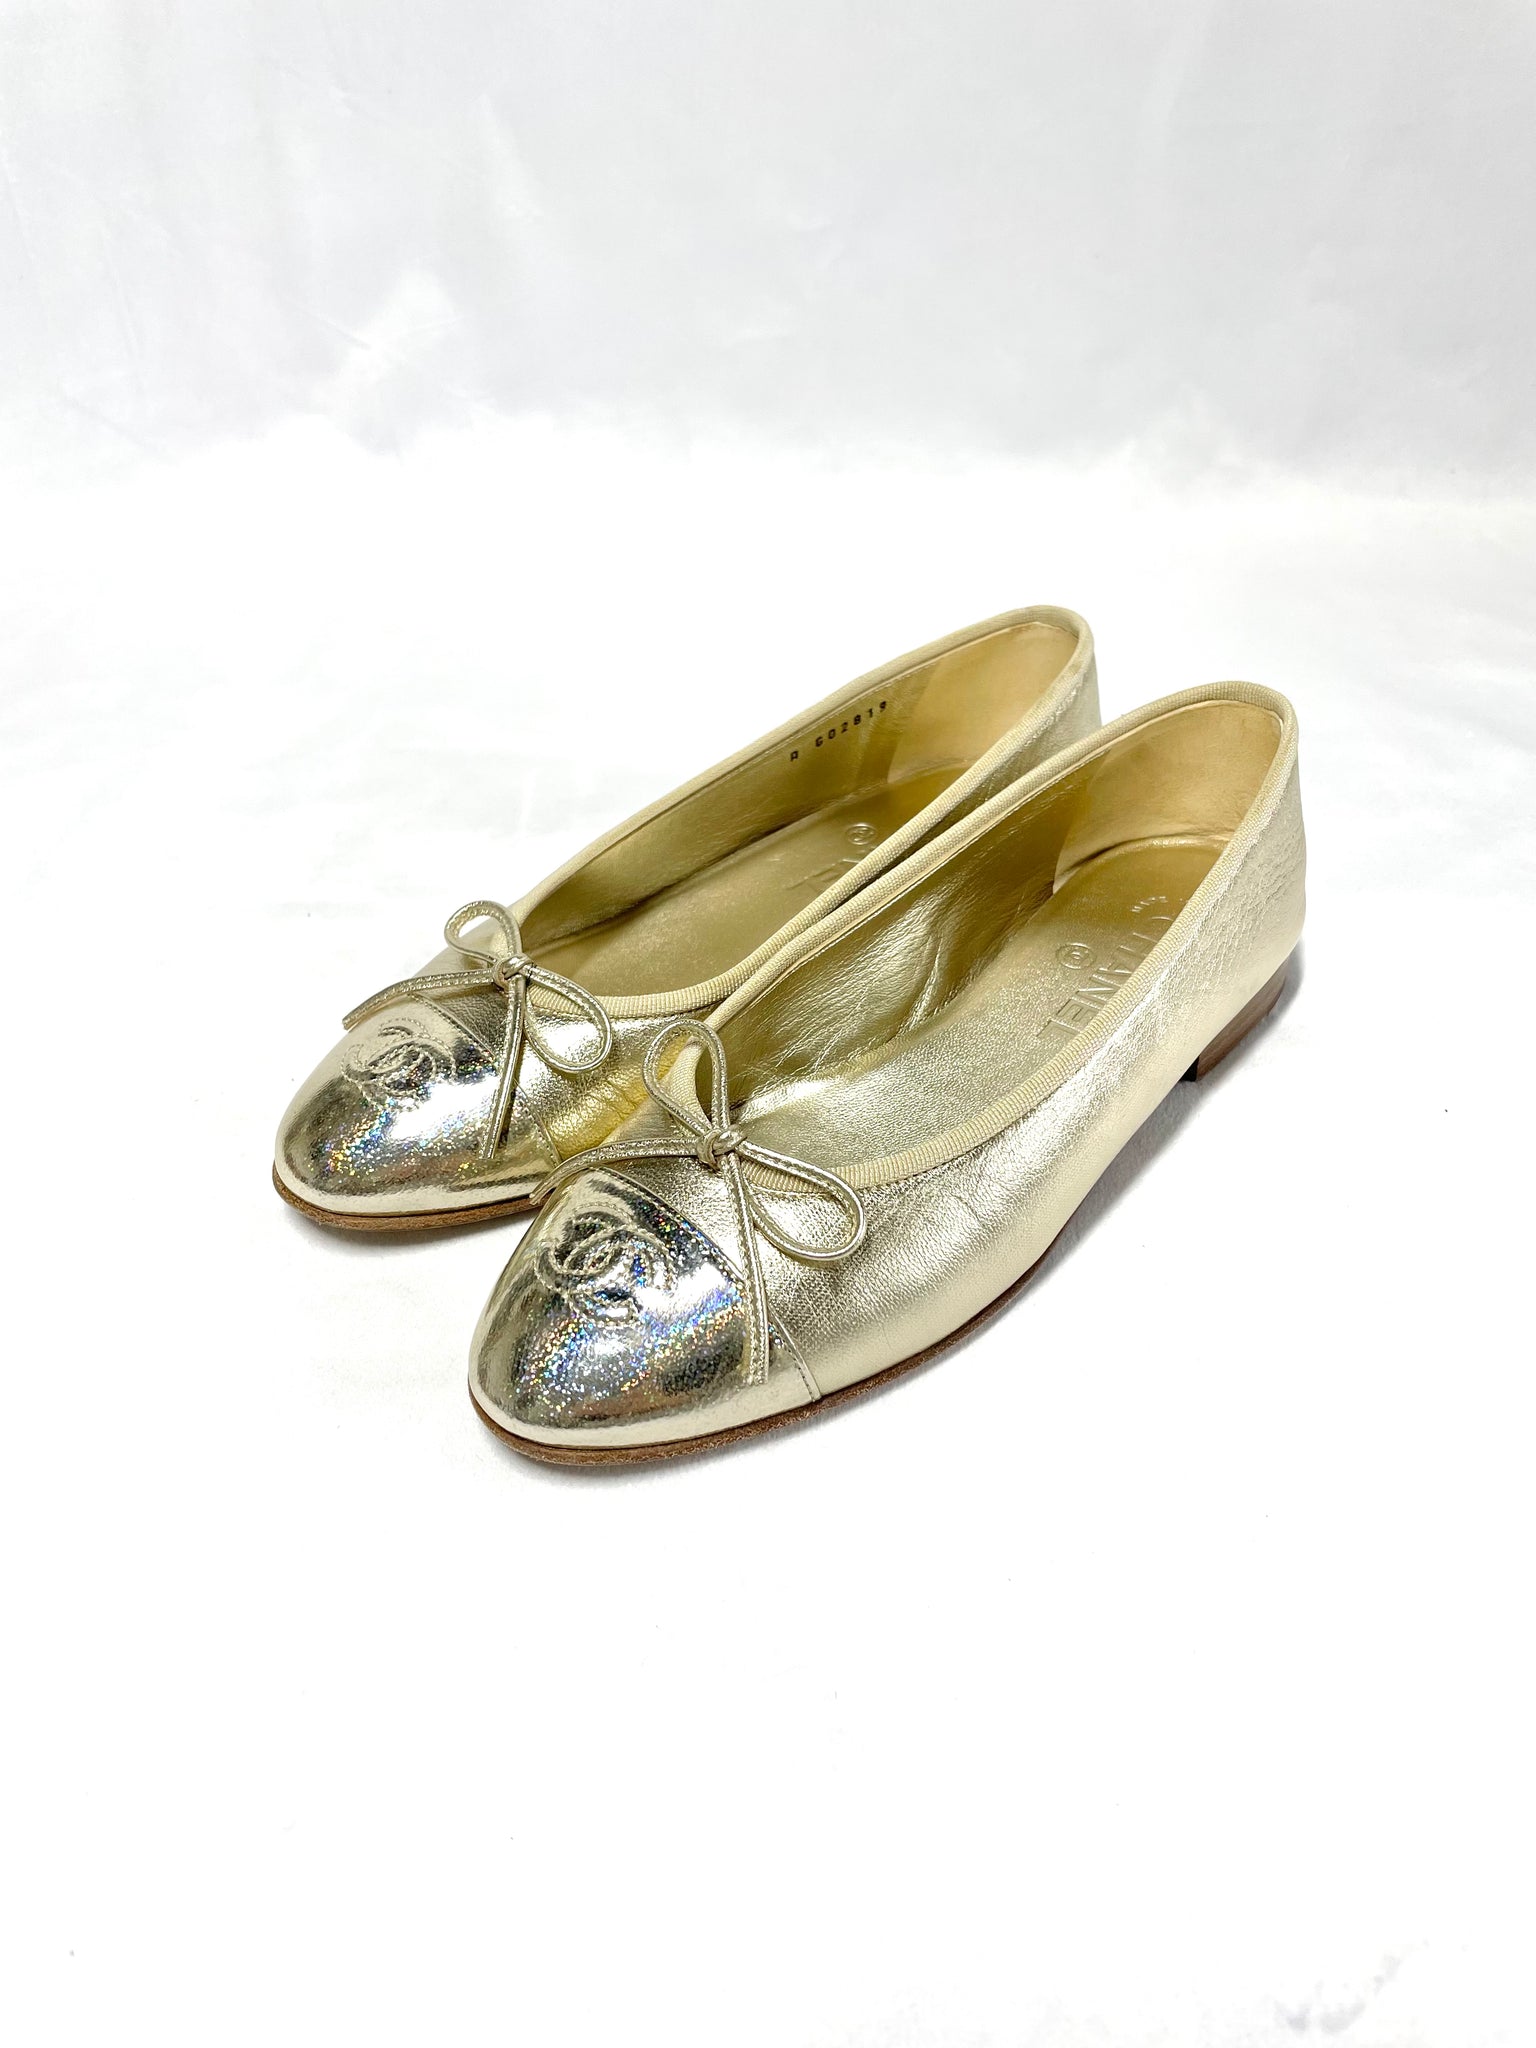 Pre Loved Chanel Gold Ballet Flats *limited edition* 37.5 from UniKoncept in Waterloo